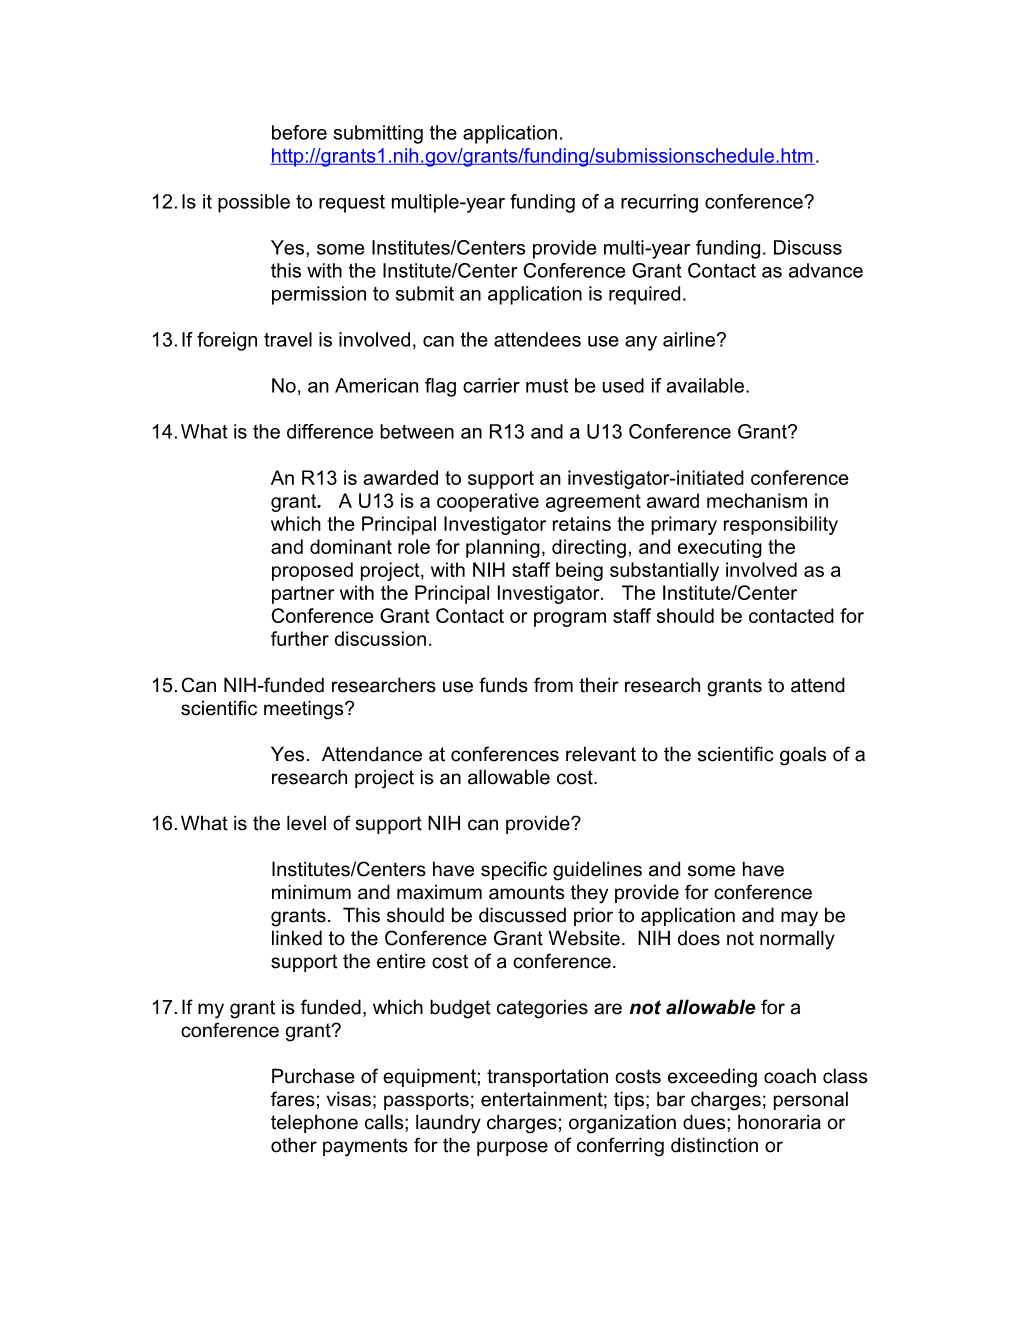 Frequently Asked Questions (Faqs) for Conference Grants (R13/U13) - 06/13/2008